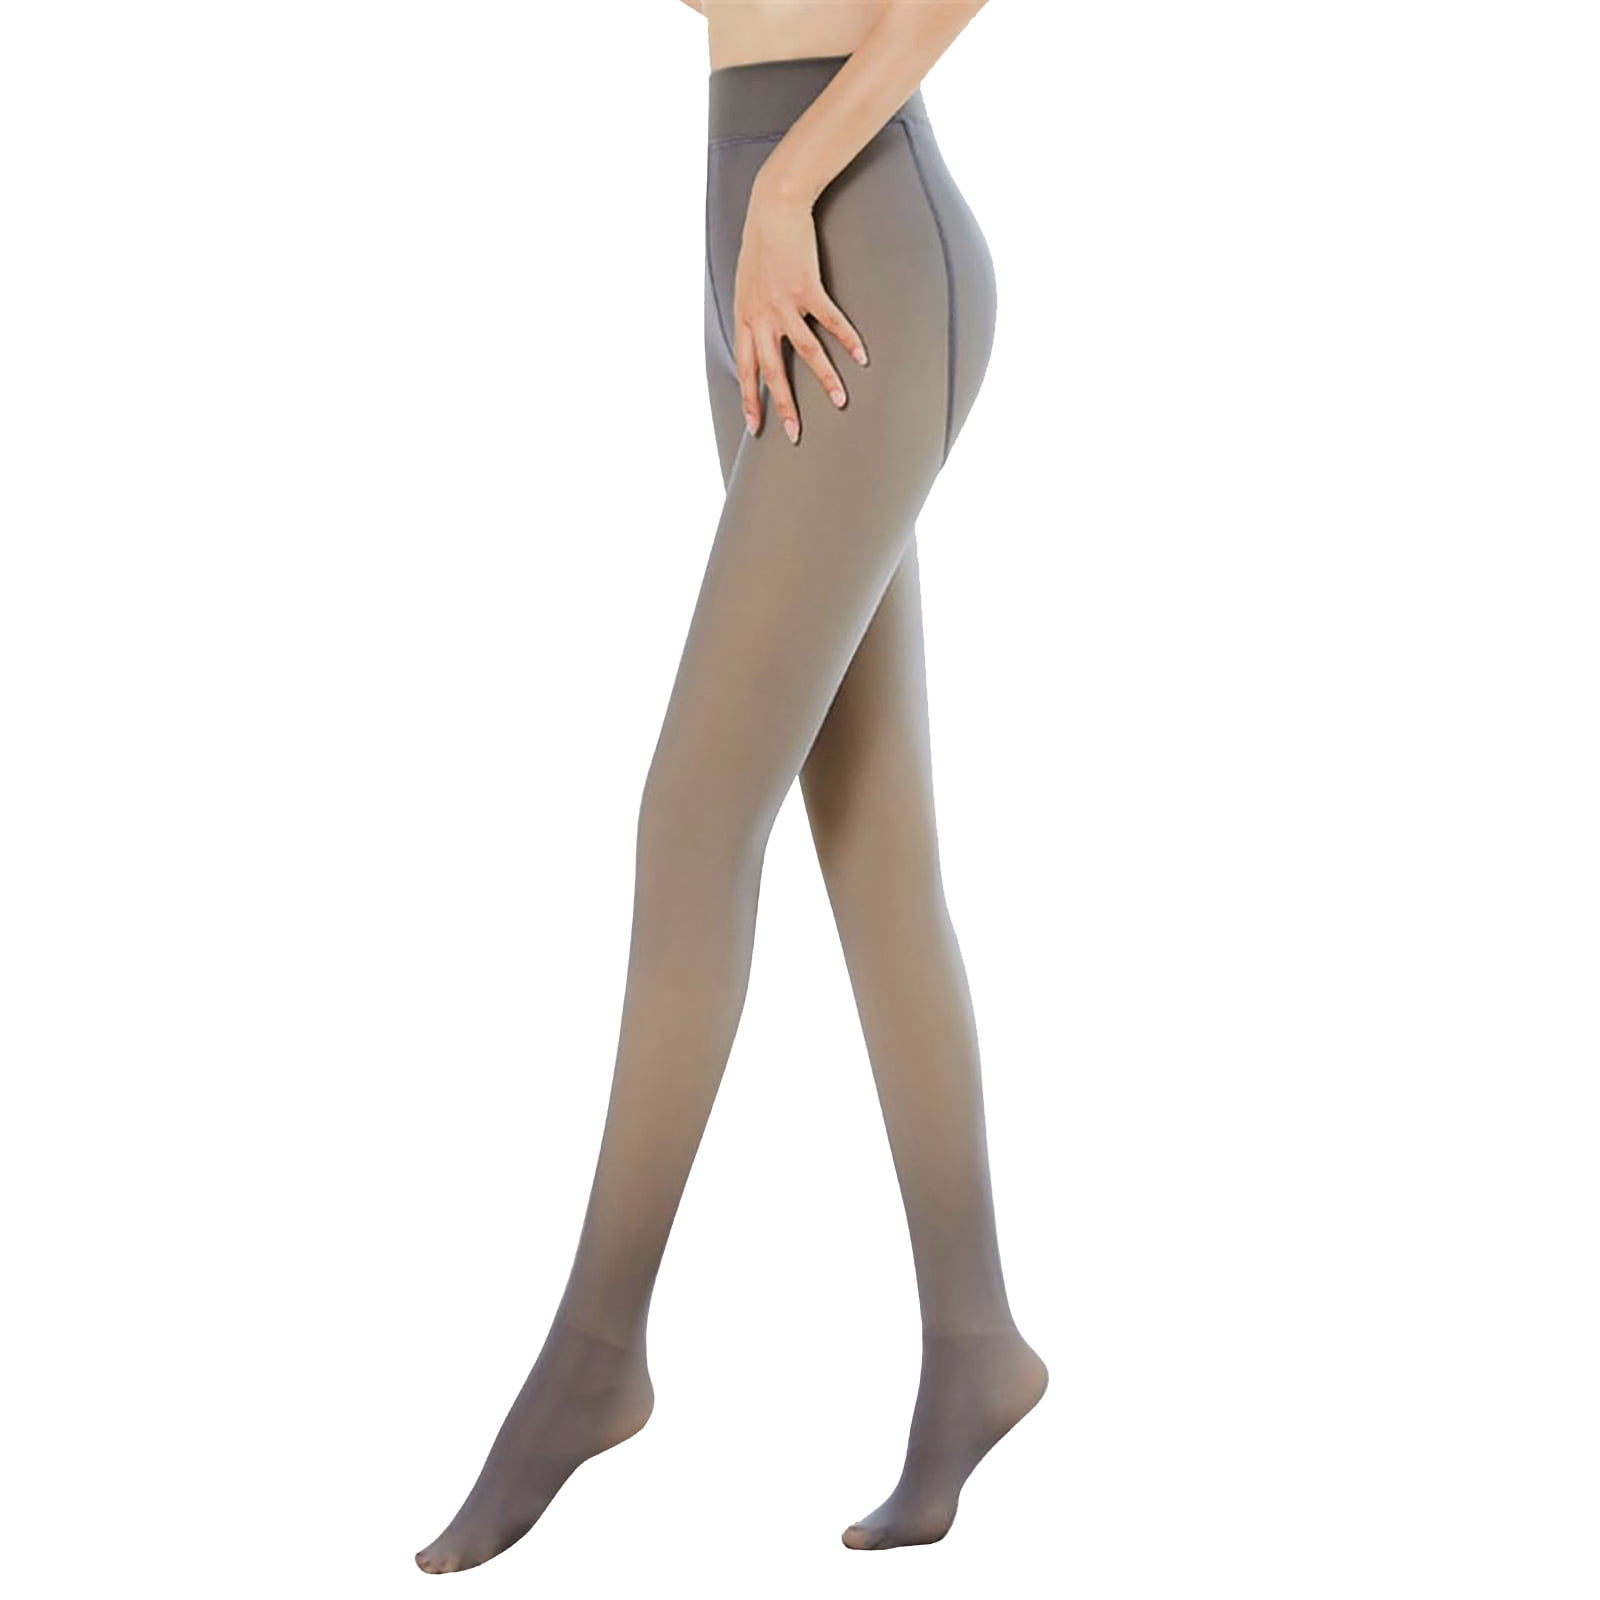 SEARCHI Women's Sheer Tights - Top Pantyhose Reinforced Toes